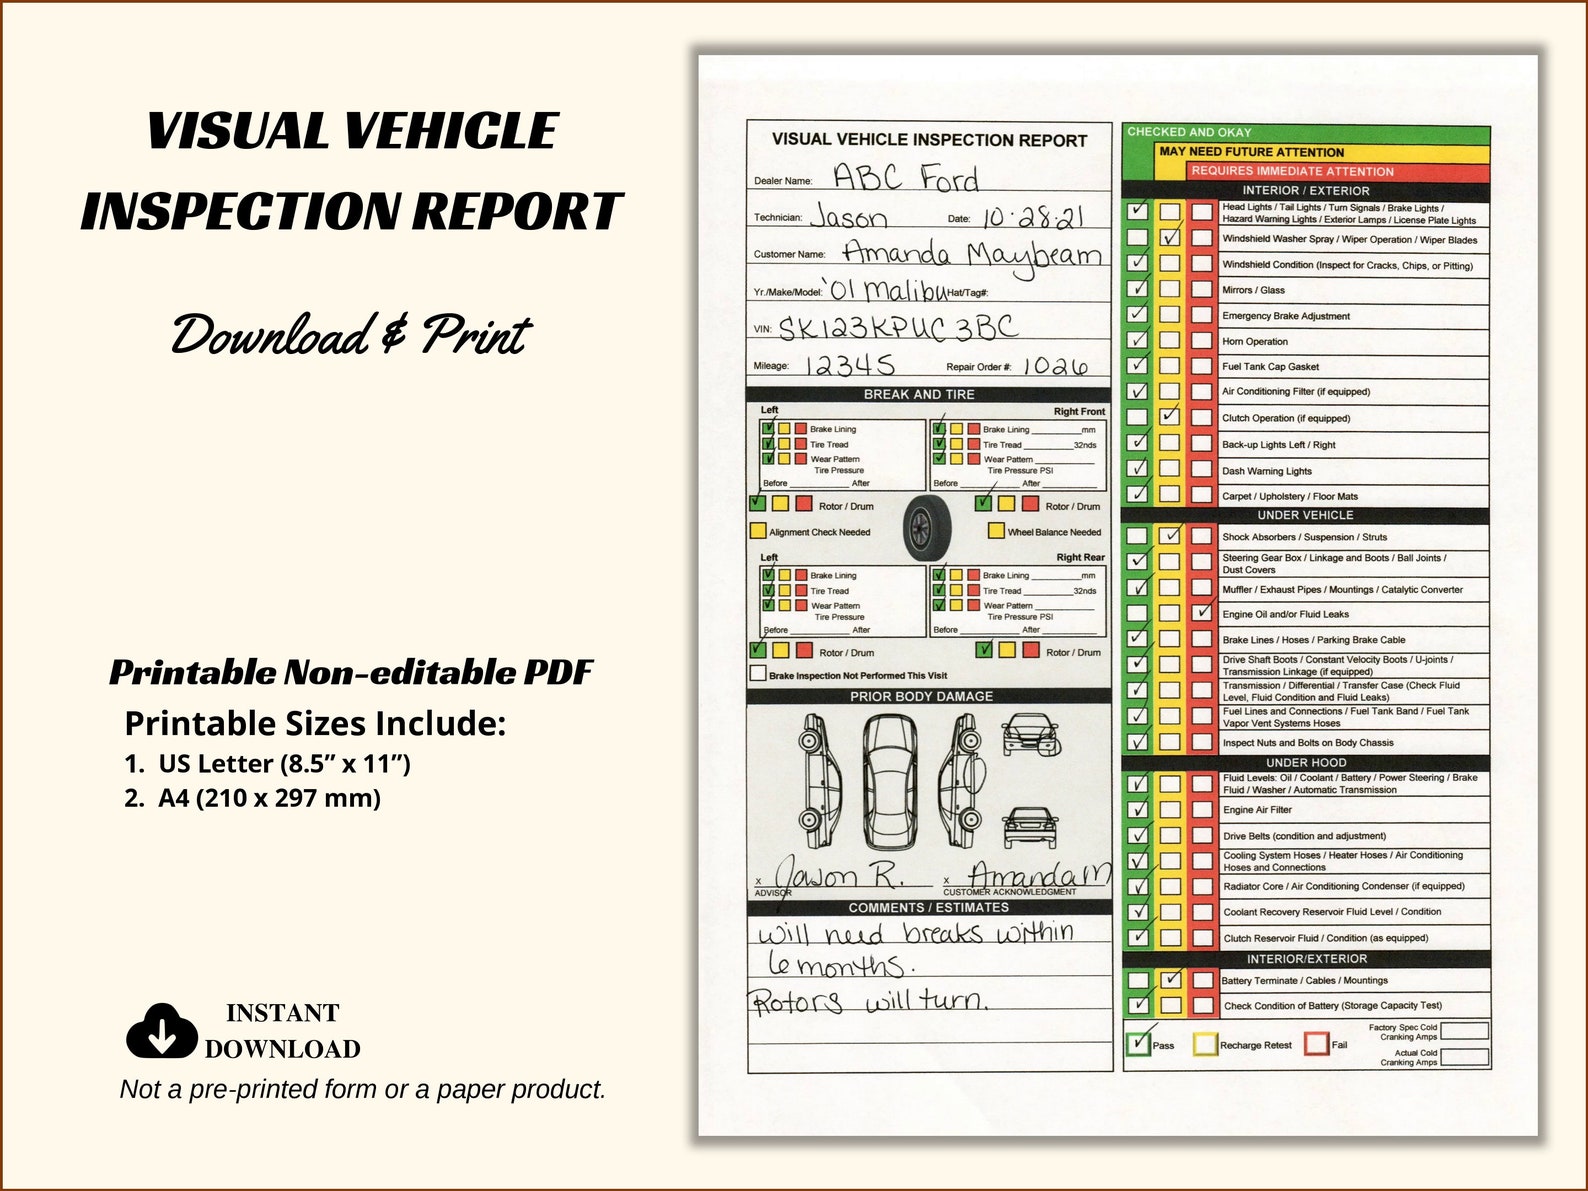 Visual Vehicle Inspection Report Multi-point Inspection - Etsy